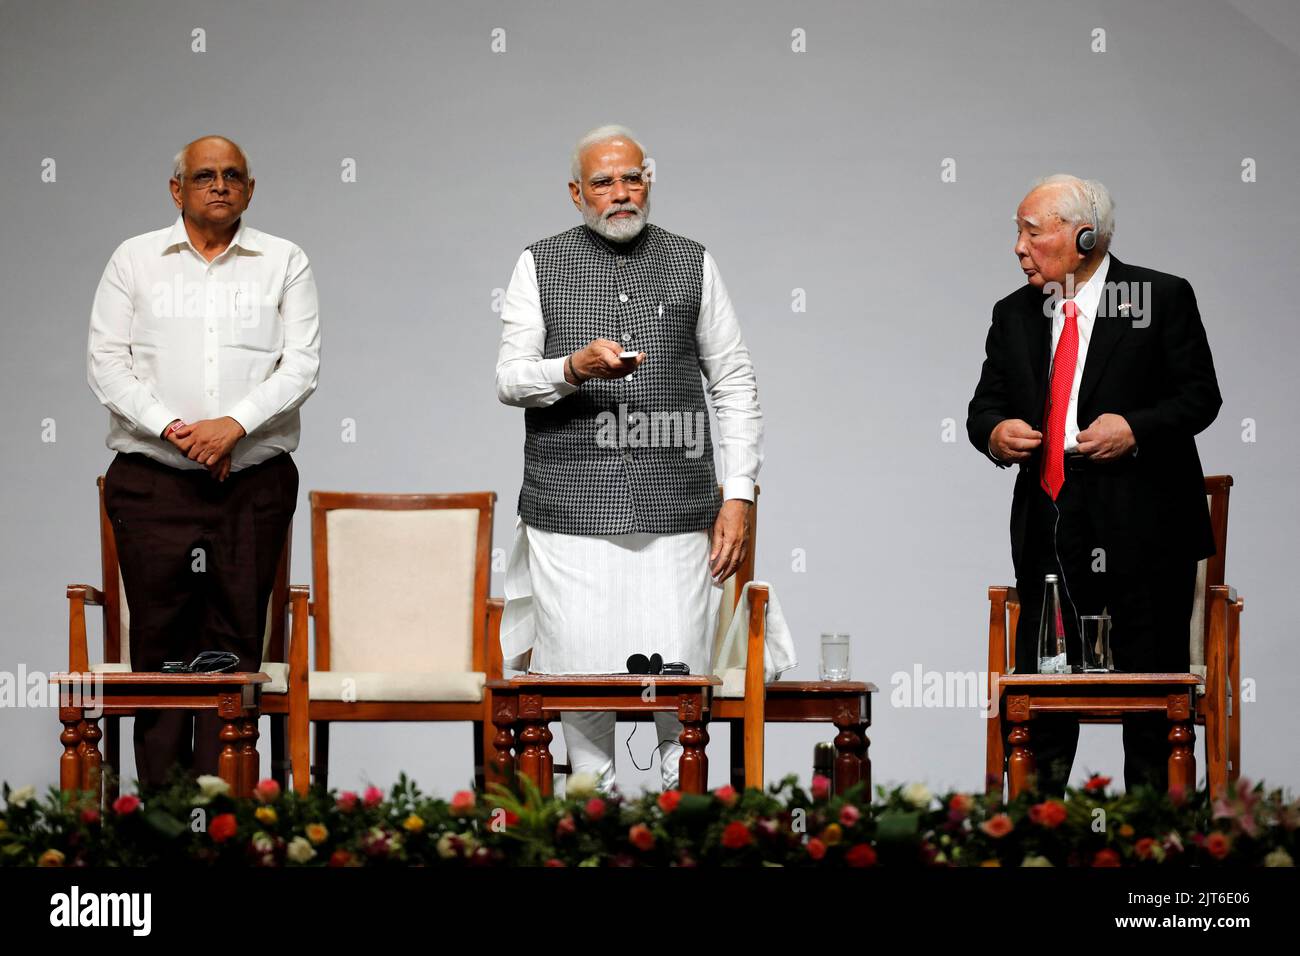 India's Prime Minister Narendra Modi lays foundation stone of Maruti's new car plant as Japan's Suzuki Motor Corp former chairman Osamu Suzuki and Chief Minister of Gujarat Bhupendra Patel look on during an event to commemorate 40 years of Suzuki in India, in Gandhinagar, in the western state of Gujarat, India, August 28, 2022. REUTERS/Amit Dave Stock Photo